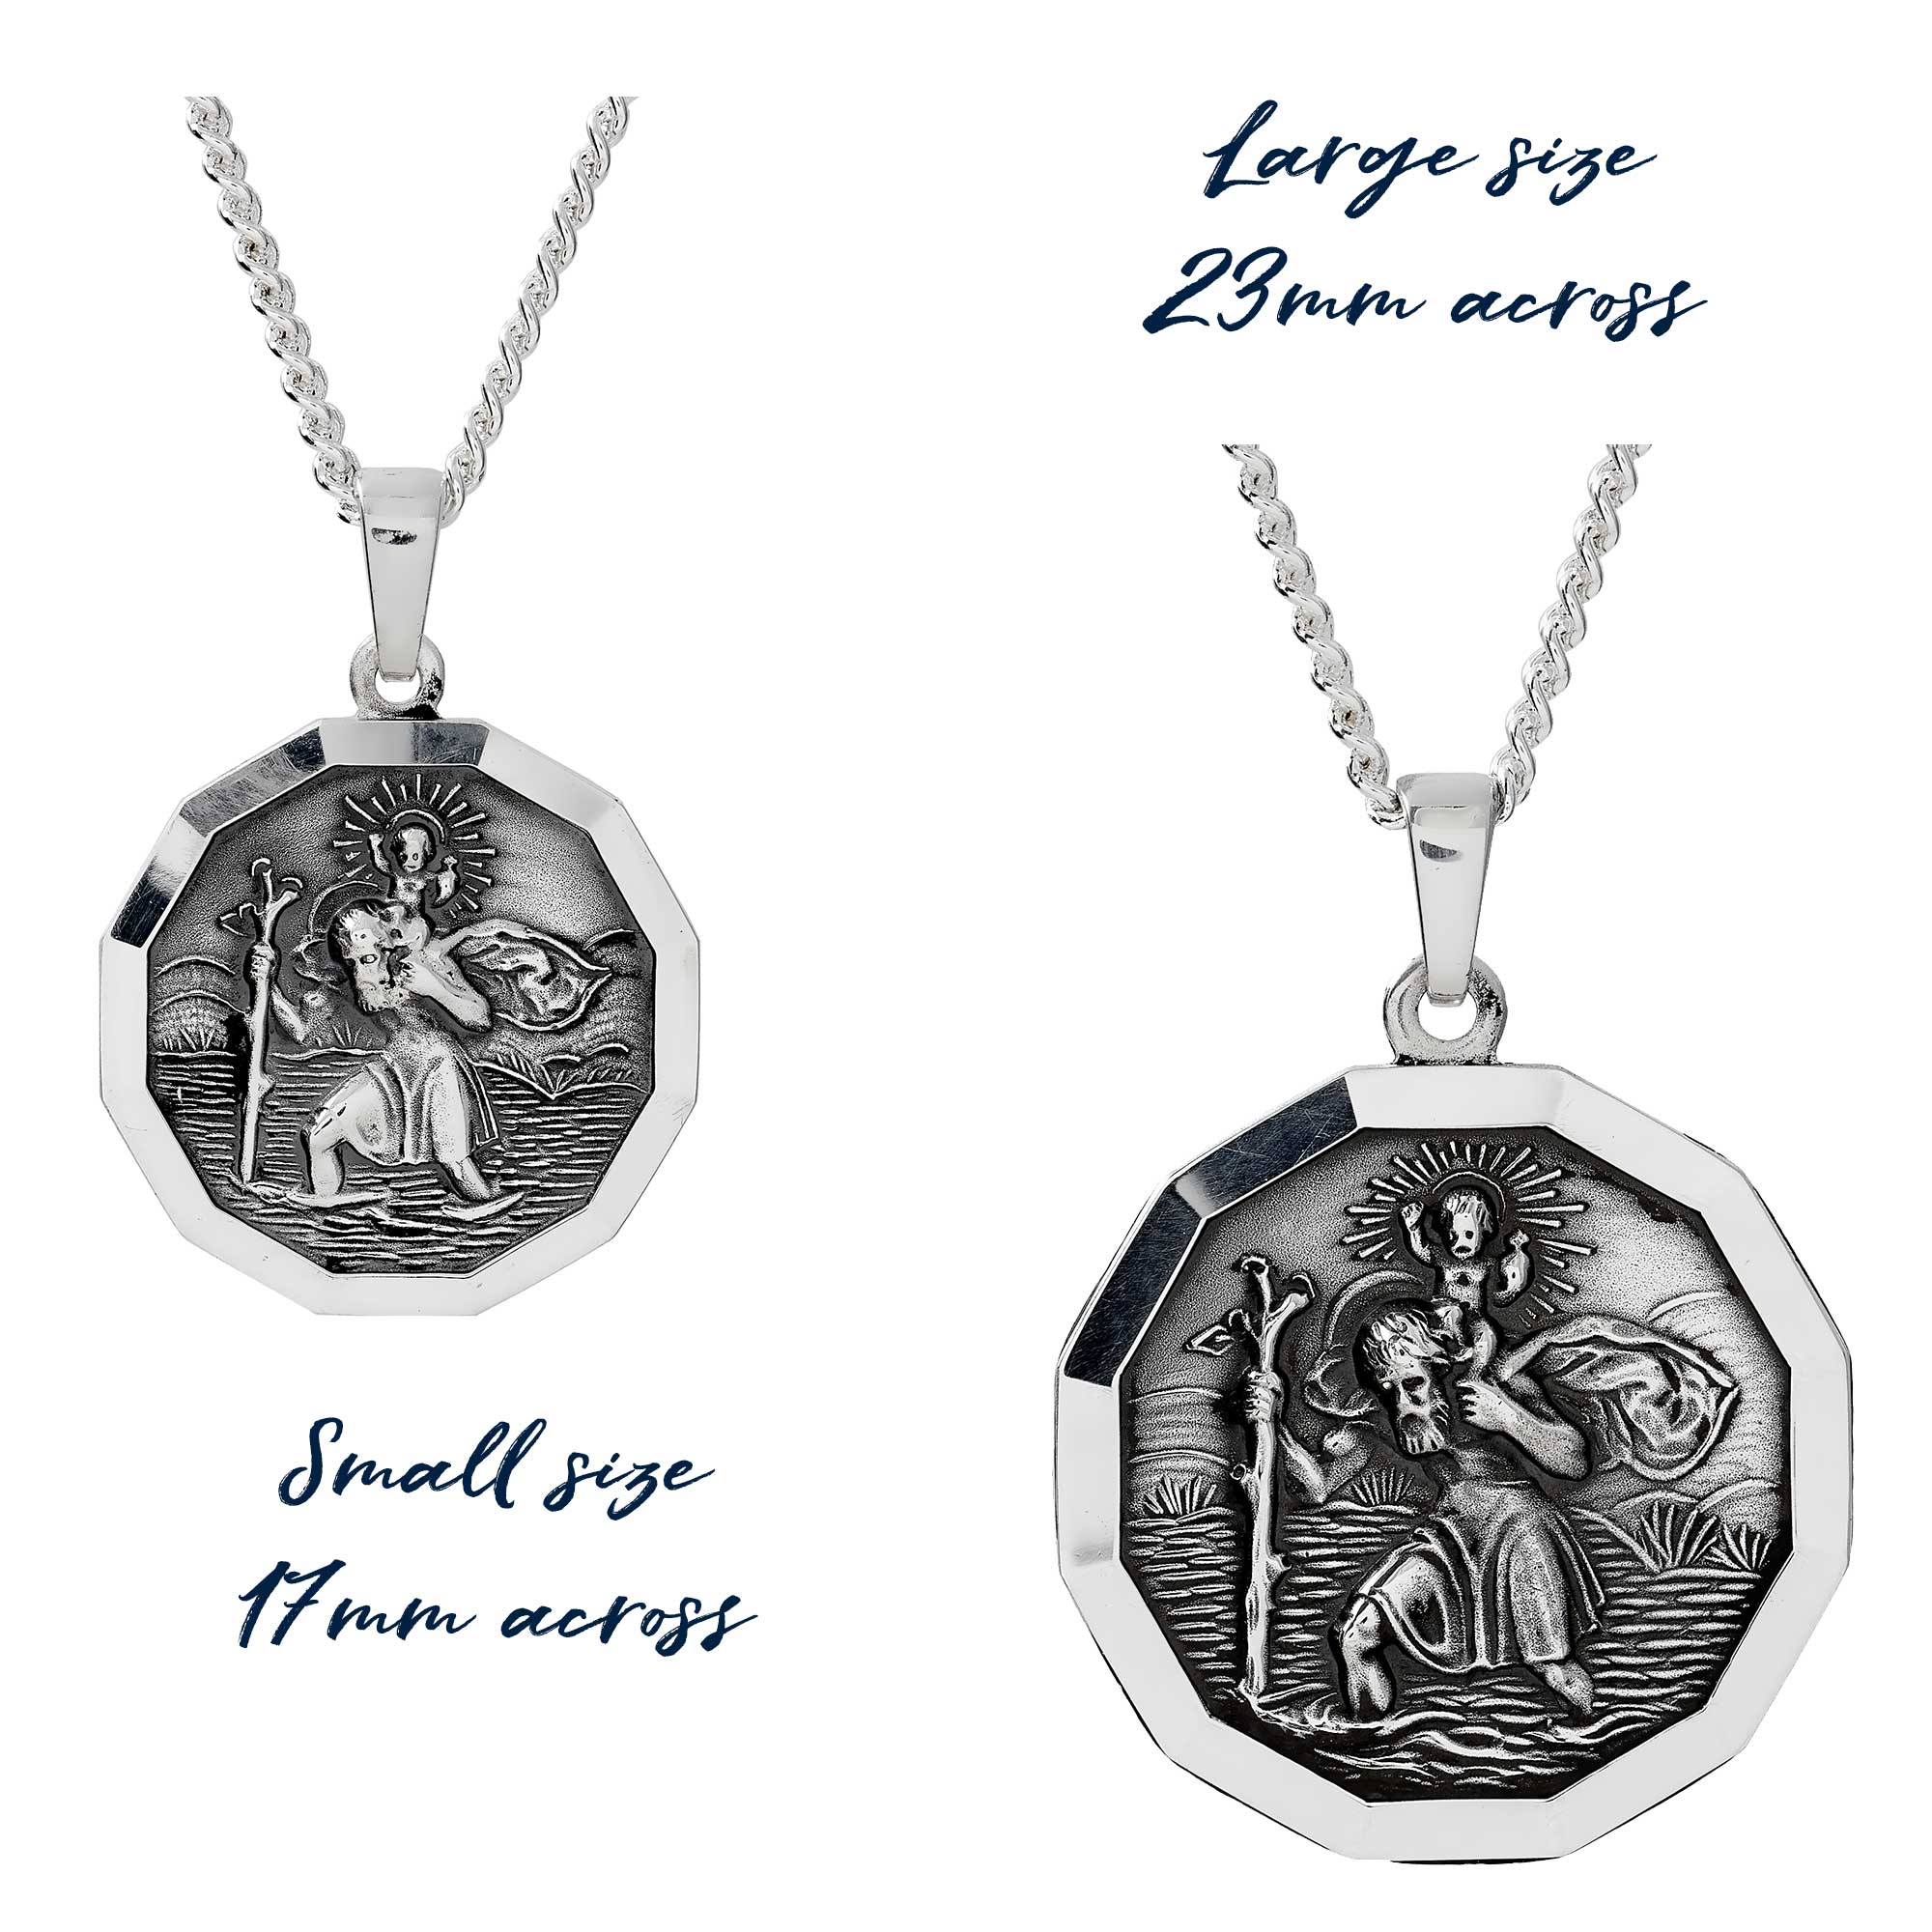 mens and womens size saint christopher pendants off the map premium travel jewelry gifts made in UK